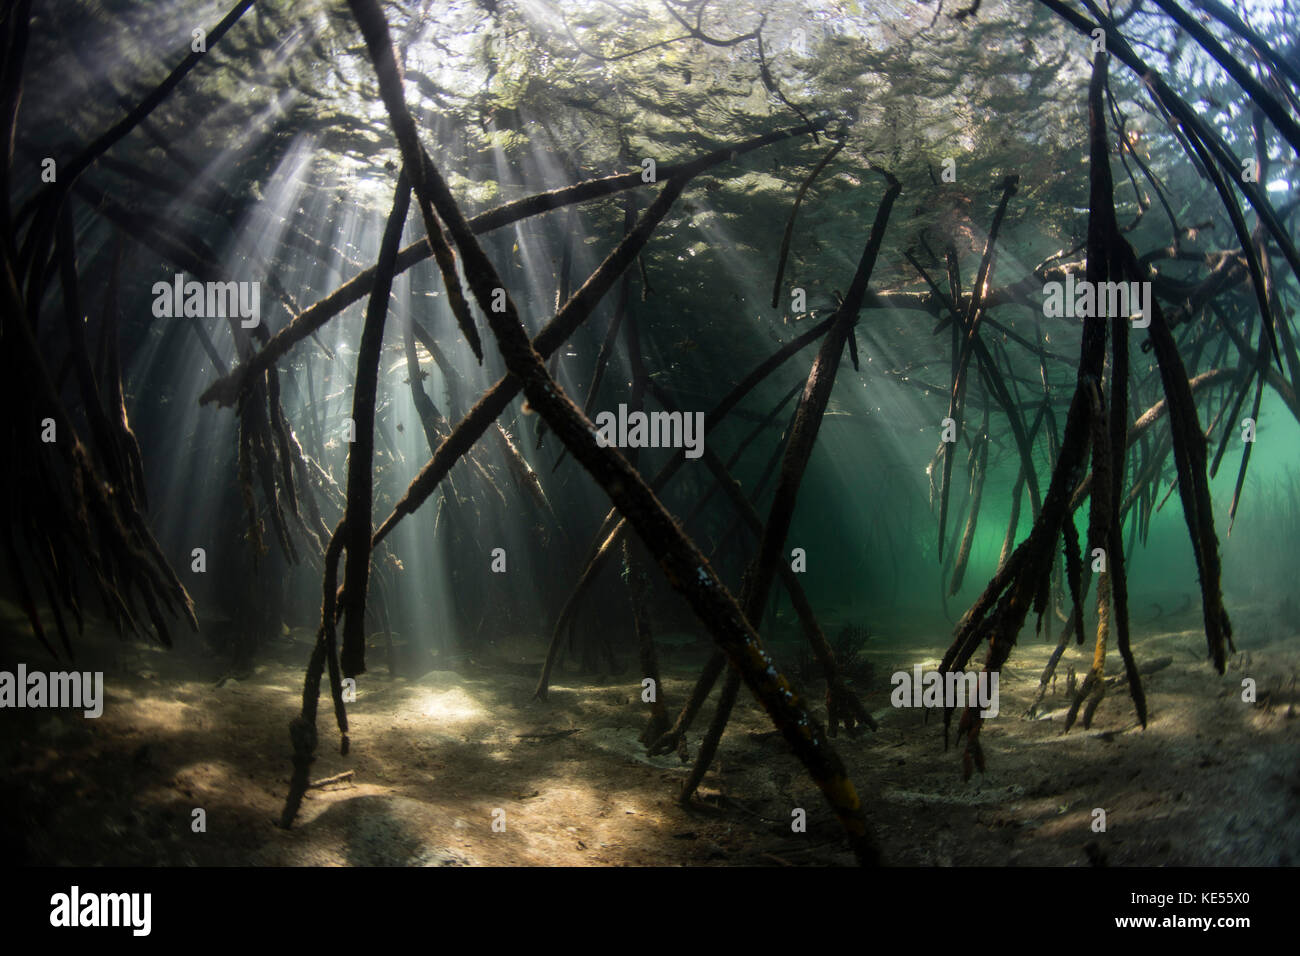 Bright sunbeams filter into the shadows of a mangrove forest in Komodo National Park. Stock Photo